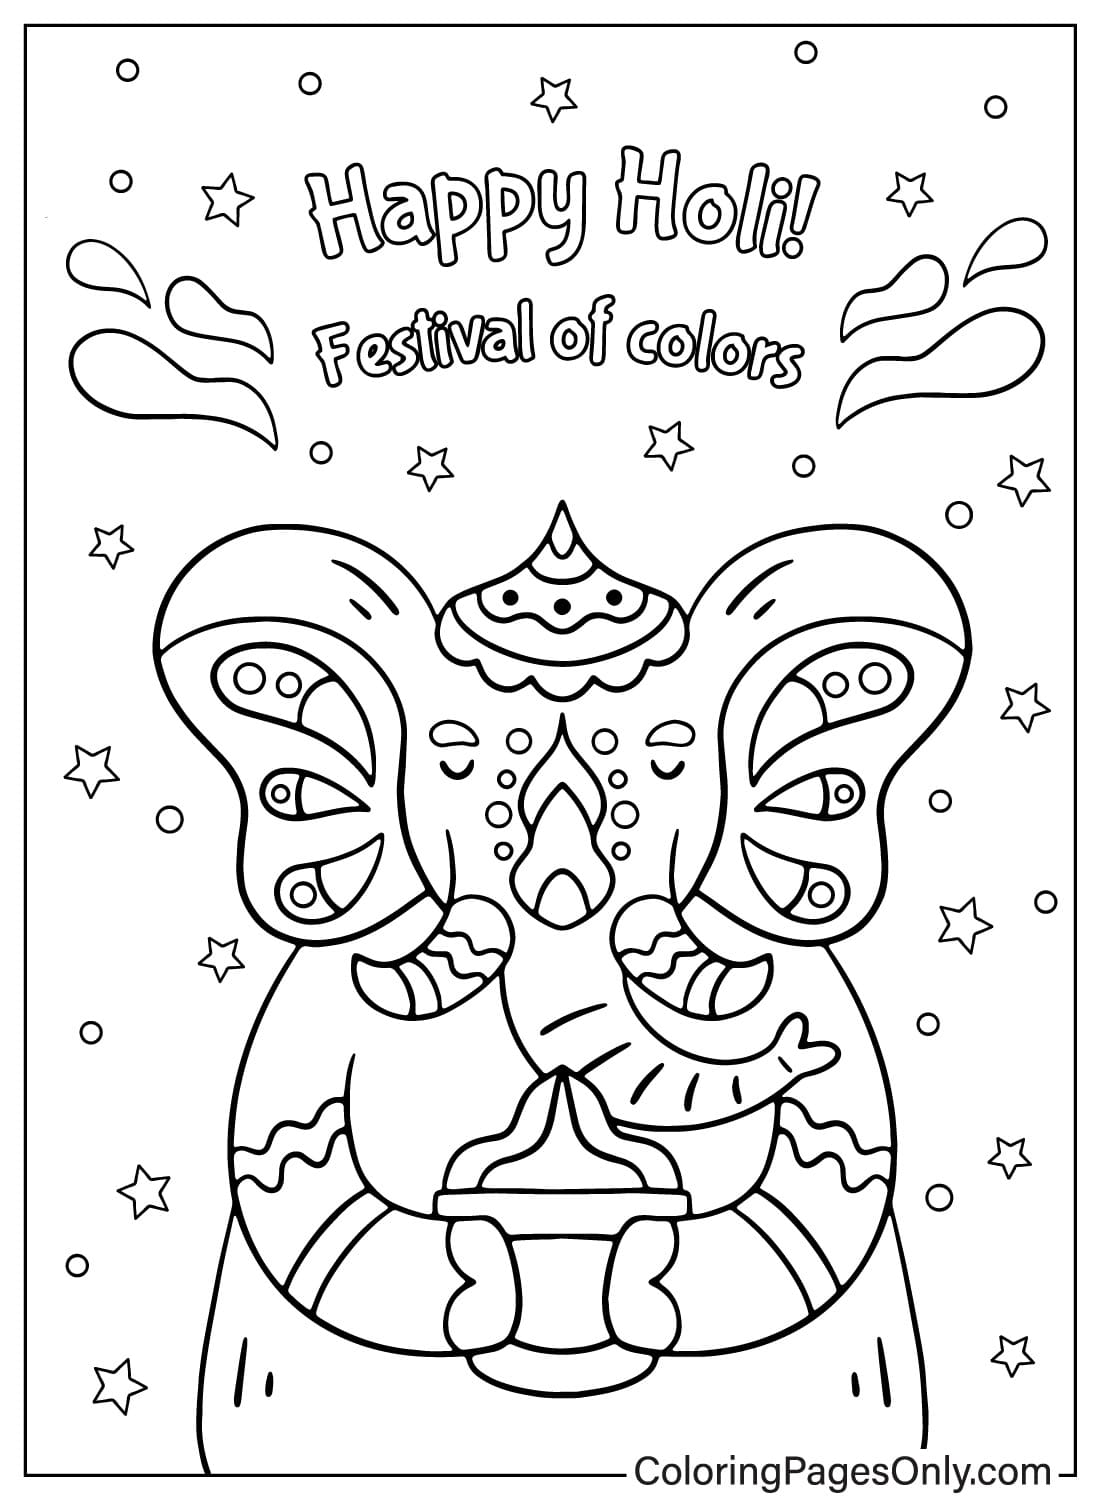 Happy Holi Festival of Colors Coloring Page from Holi